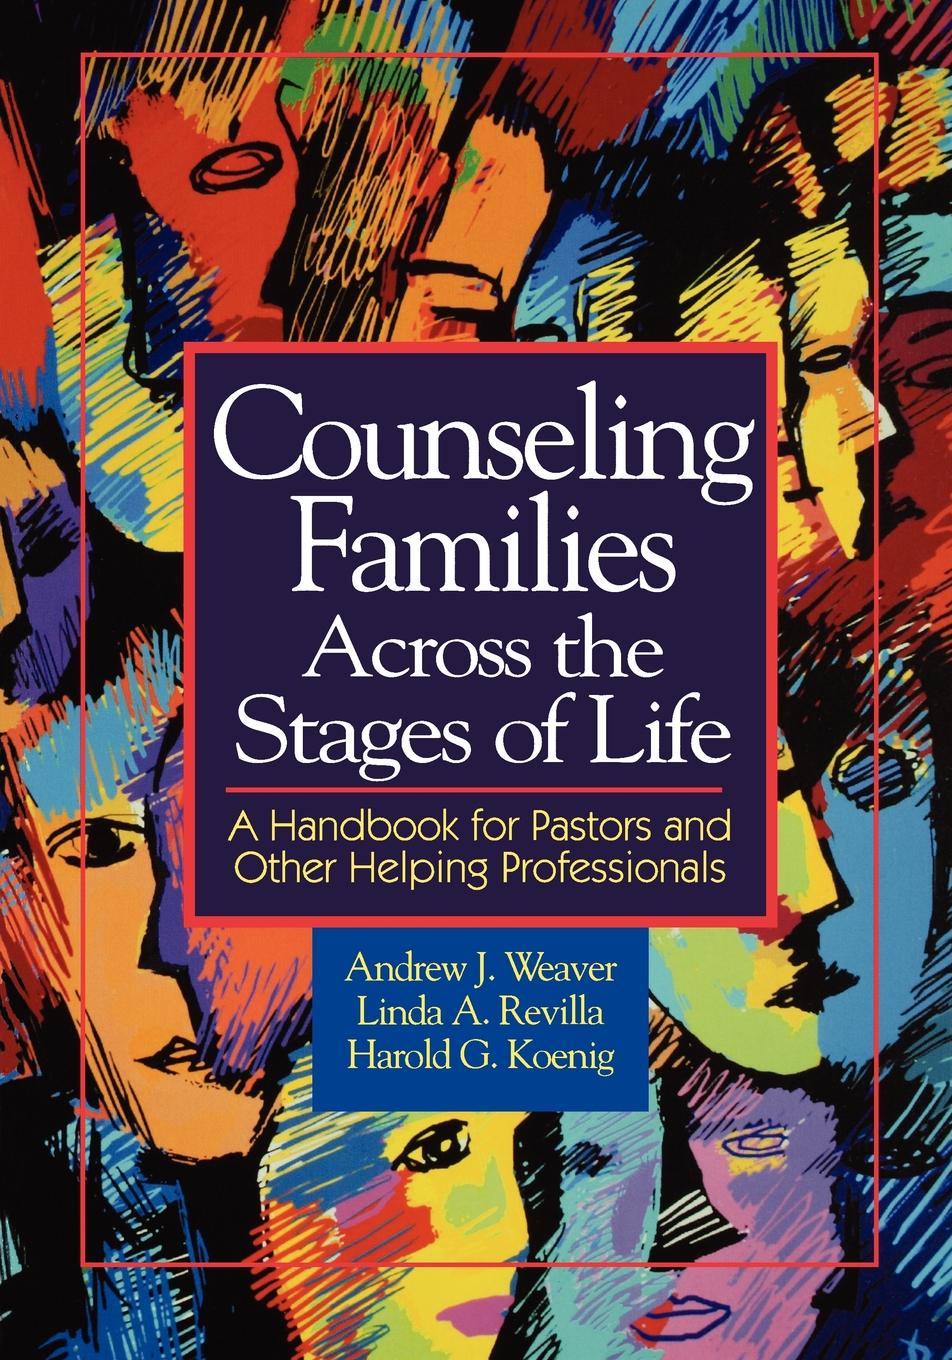 Counseling Families Across the Stages of Life. A Handbook for Pastors and Other Helping Professionals